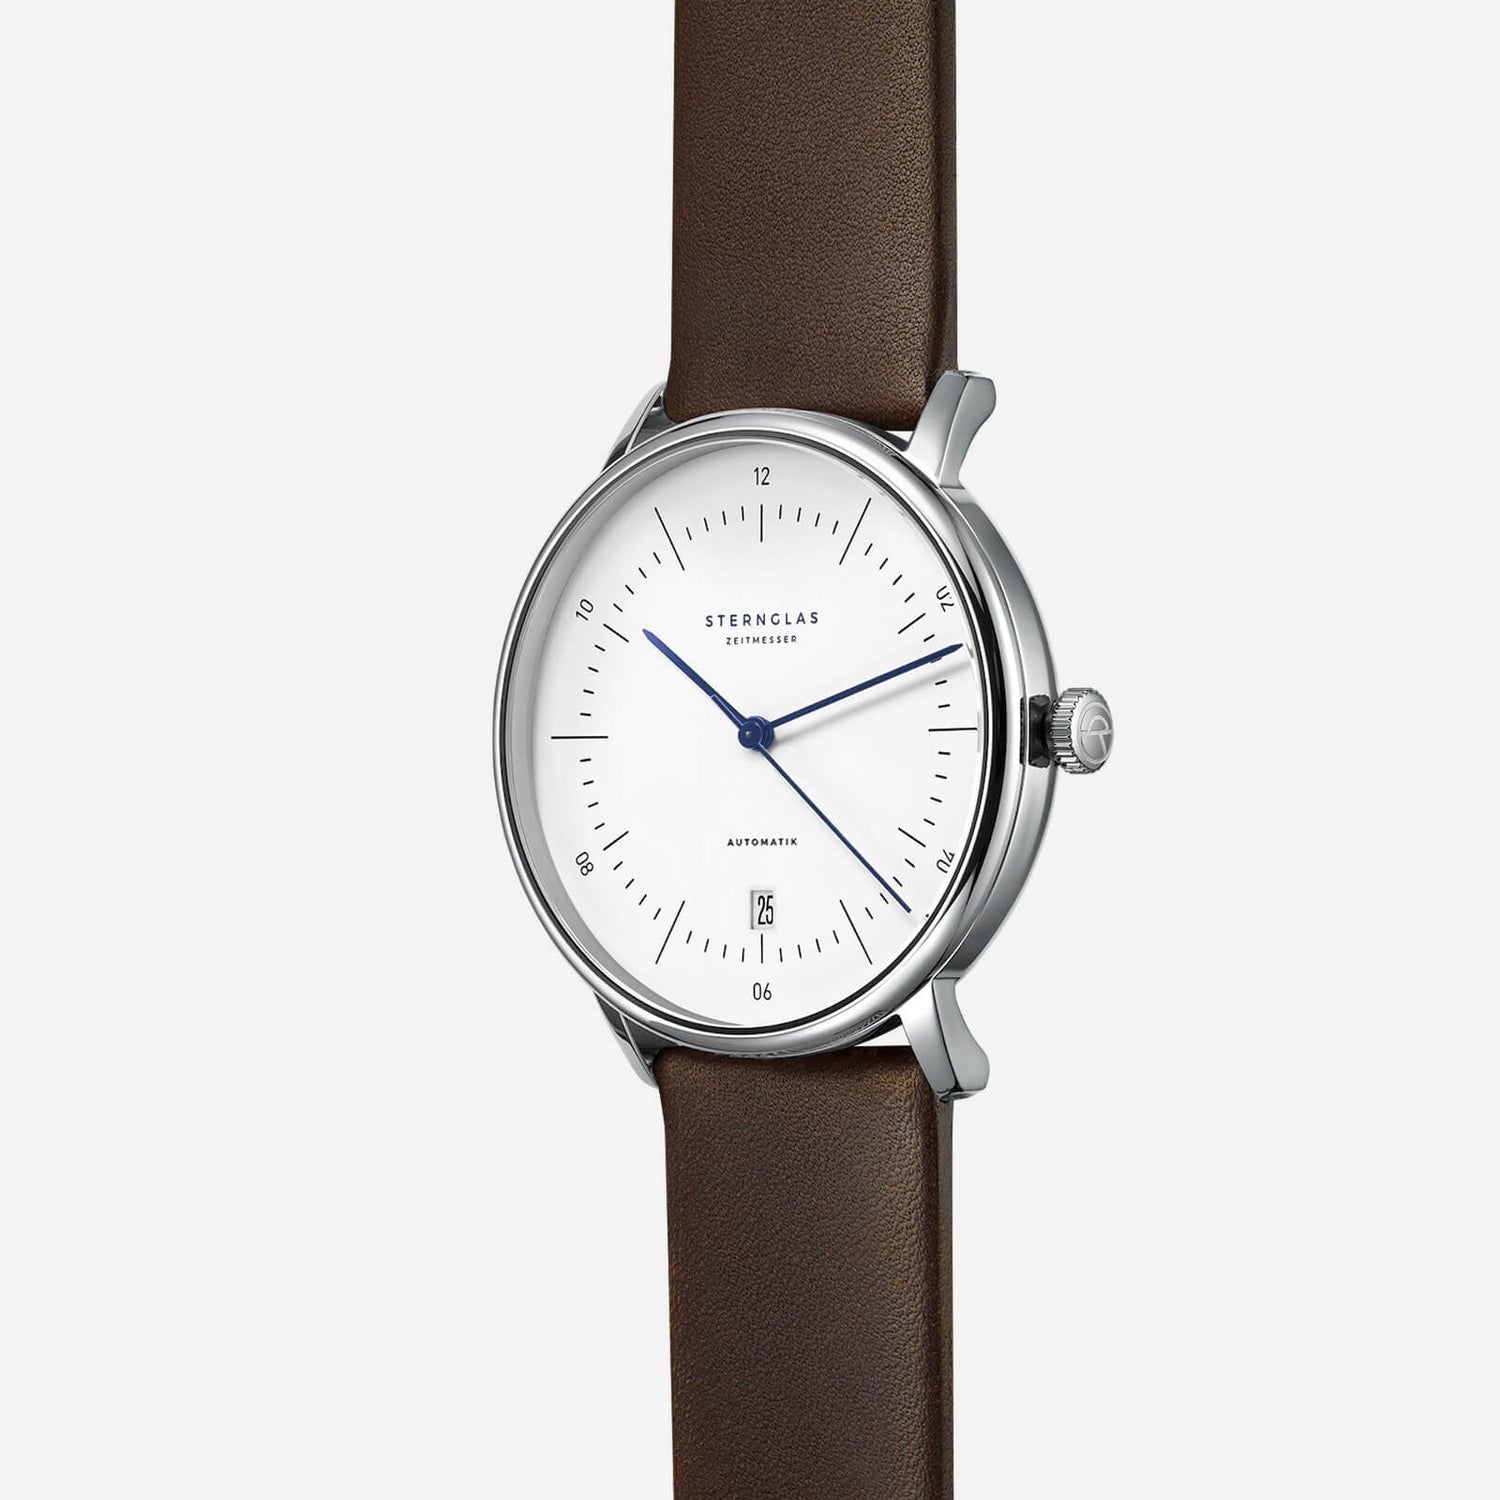 popup|Classical Bauhaus design|Inspired by the Bauhaus movement of the 1920s, the dial is reduced and kept clear.